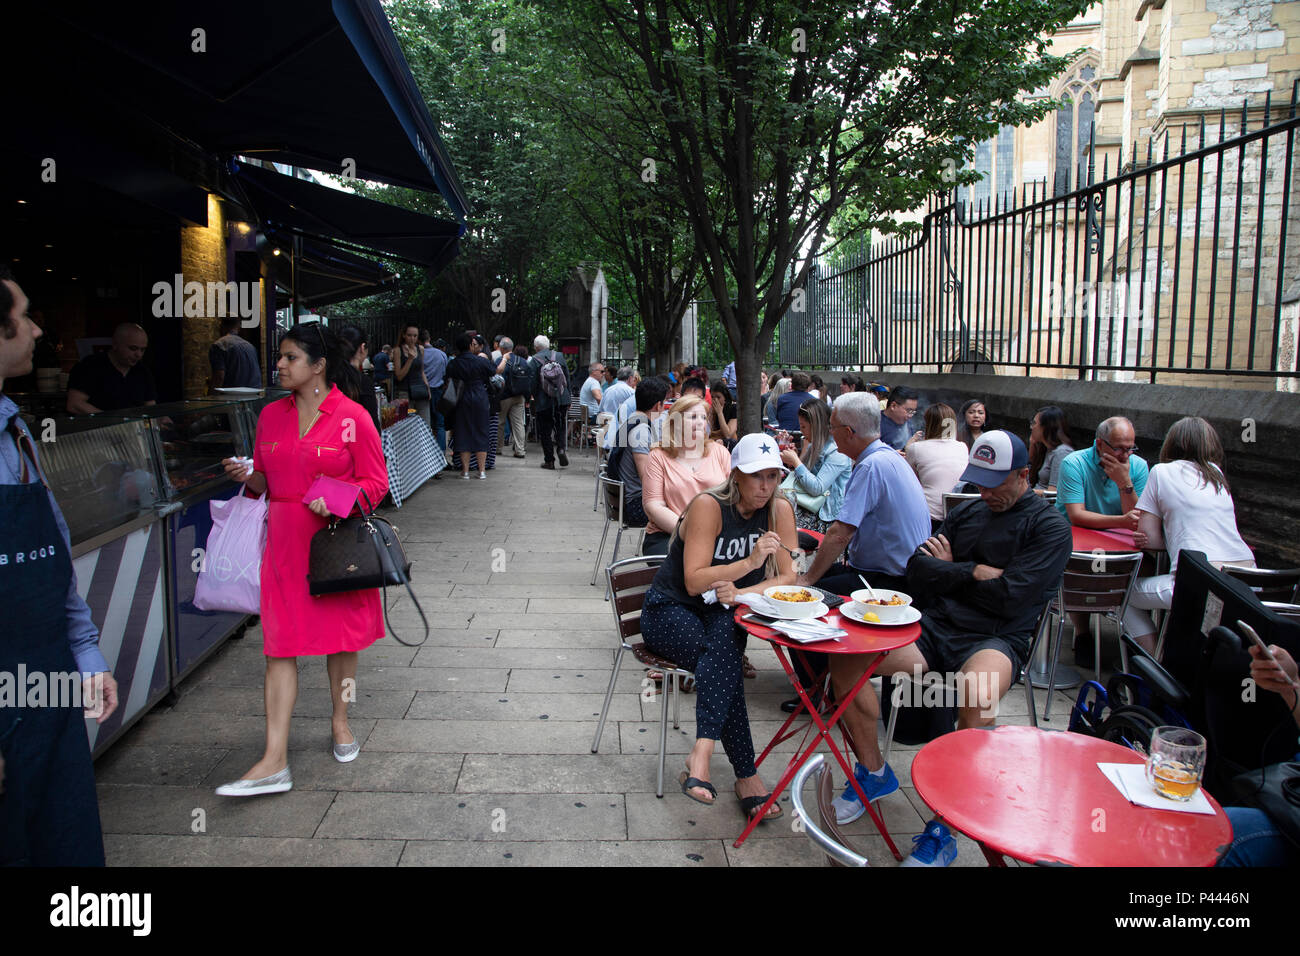 Outdoor seating at Brood restaurant in Borough Market in London, England,  United Kingdom. Borough Market is a retail food market and farmers market  in Southwark. It is one of the largest and